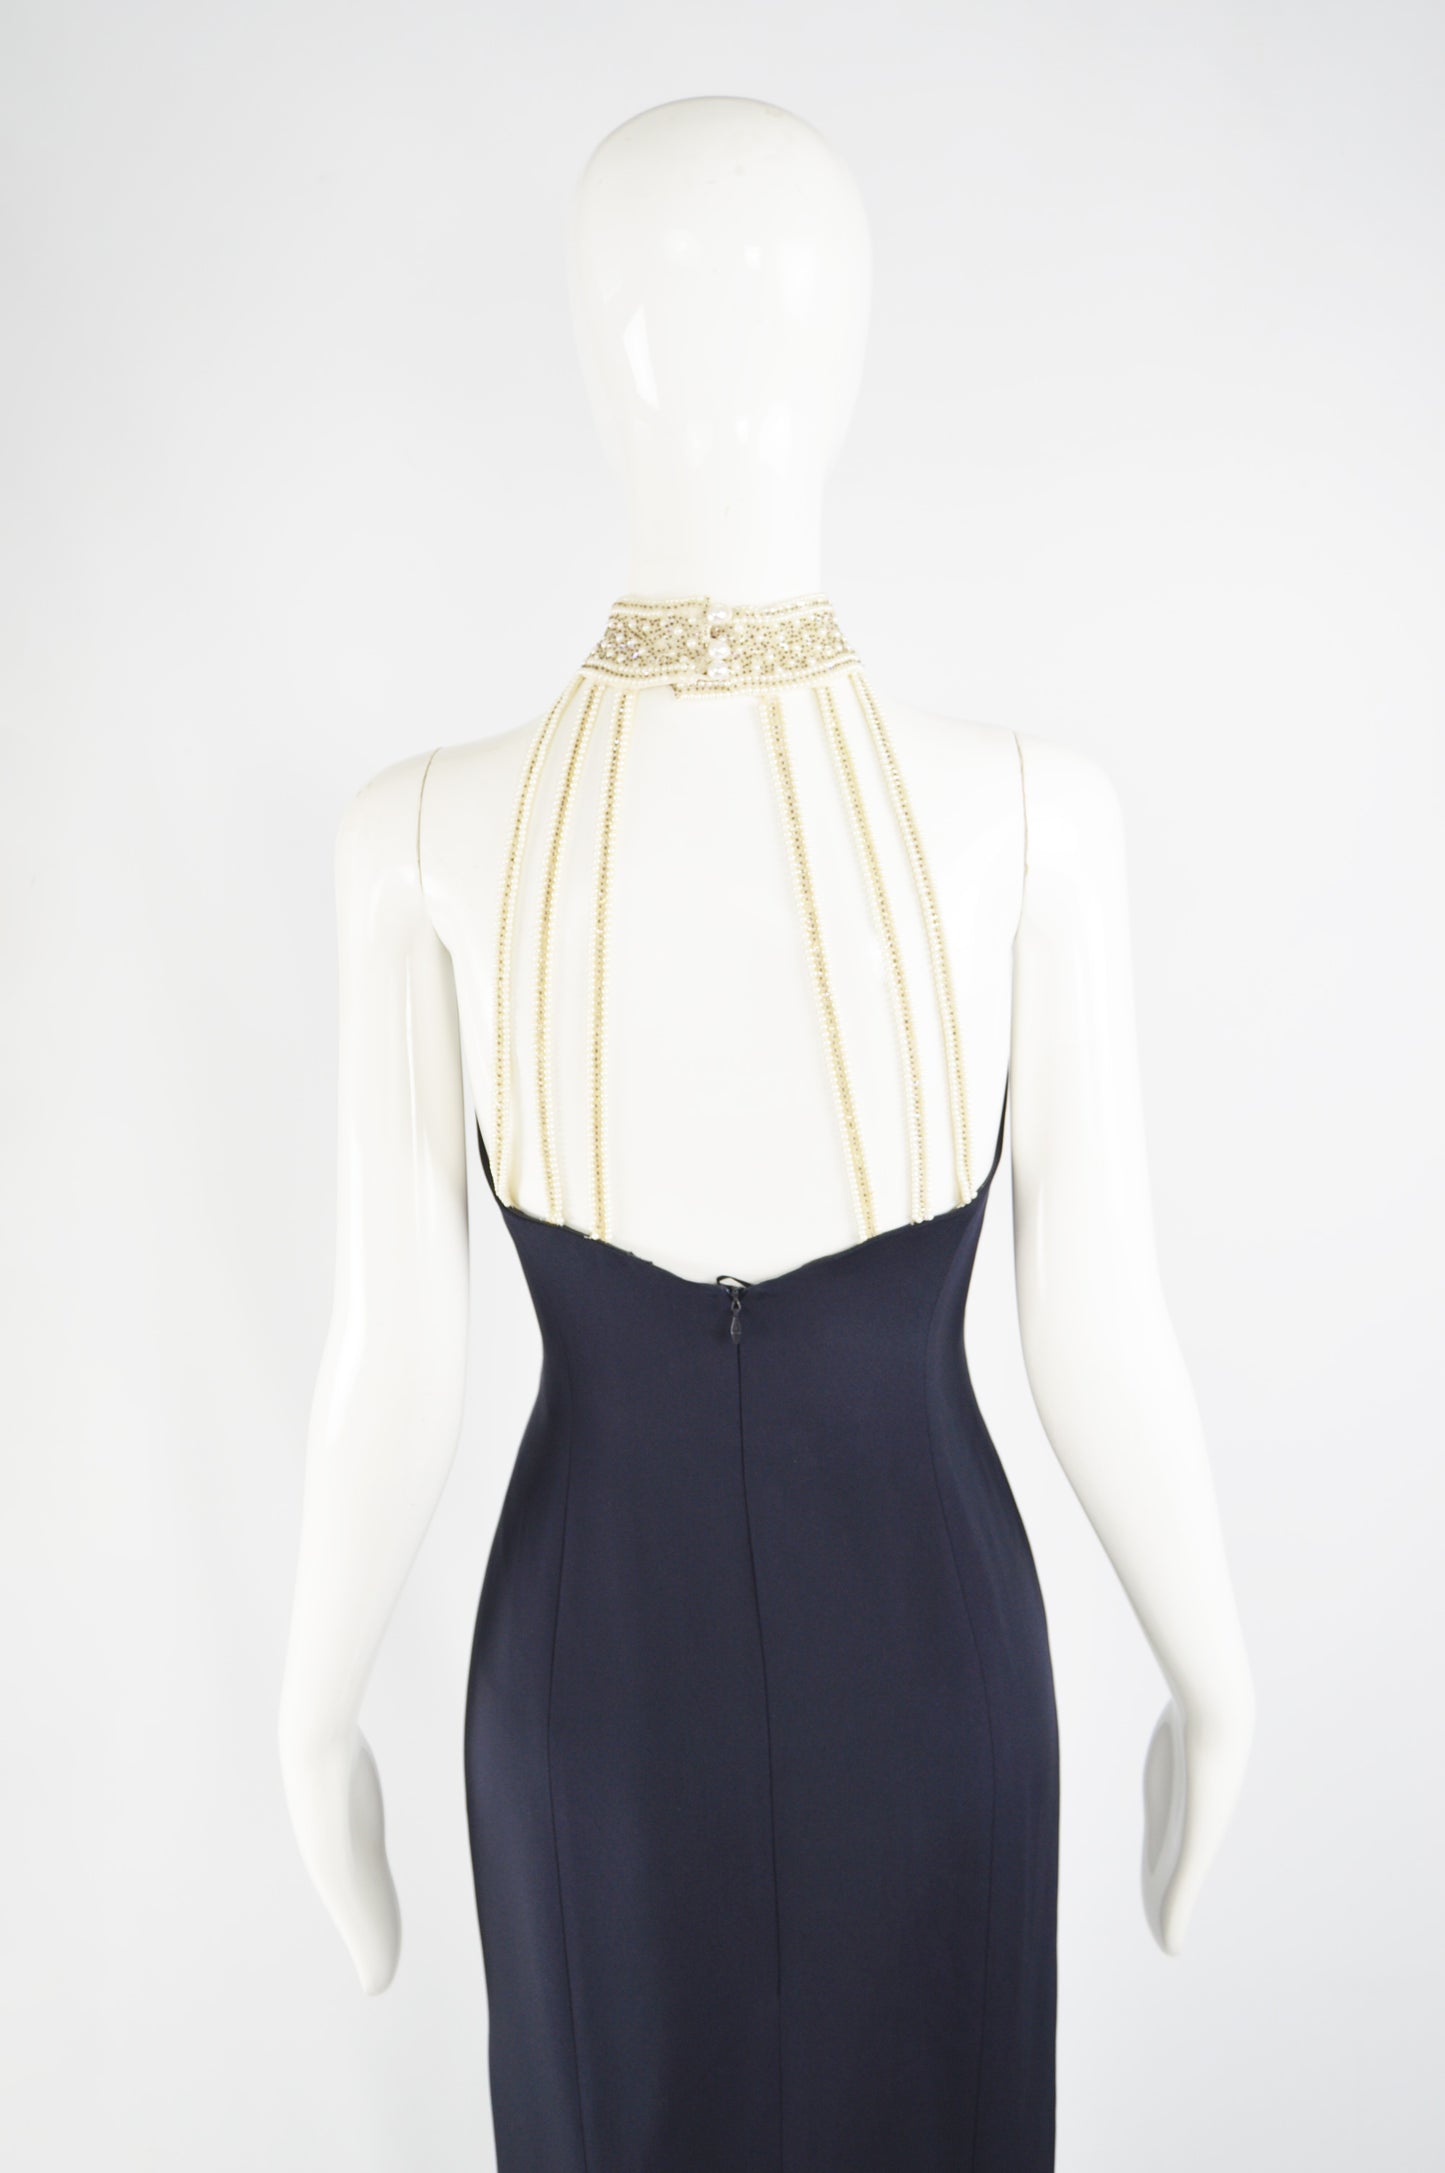 Vintage Pearl Beaded Navy Formal Evening Gown, 1980s